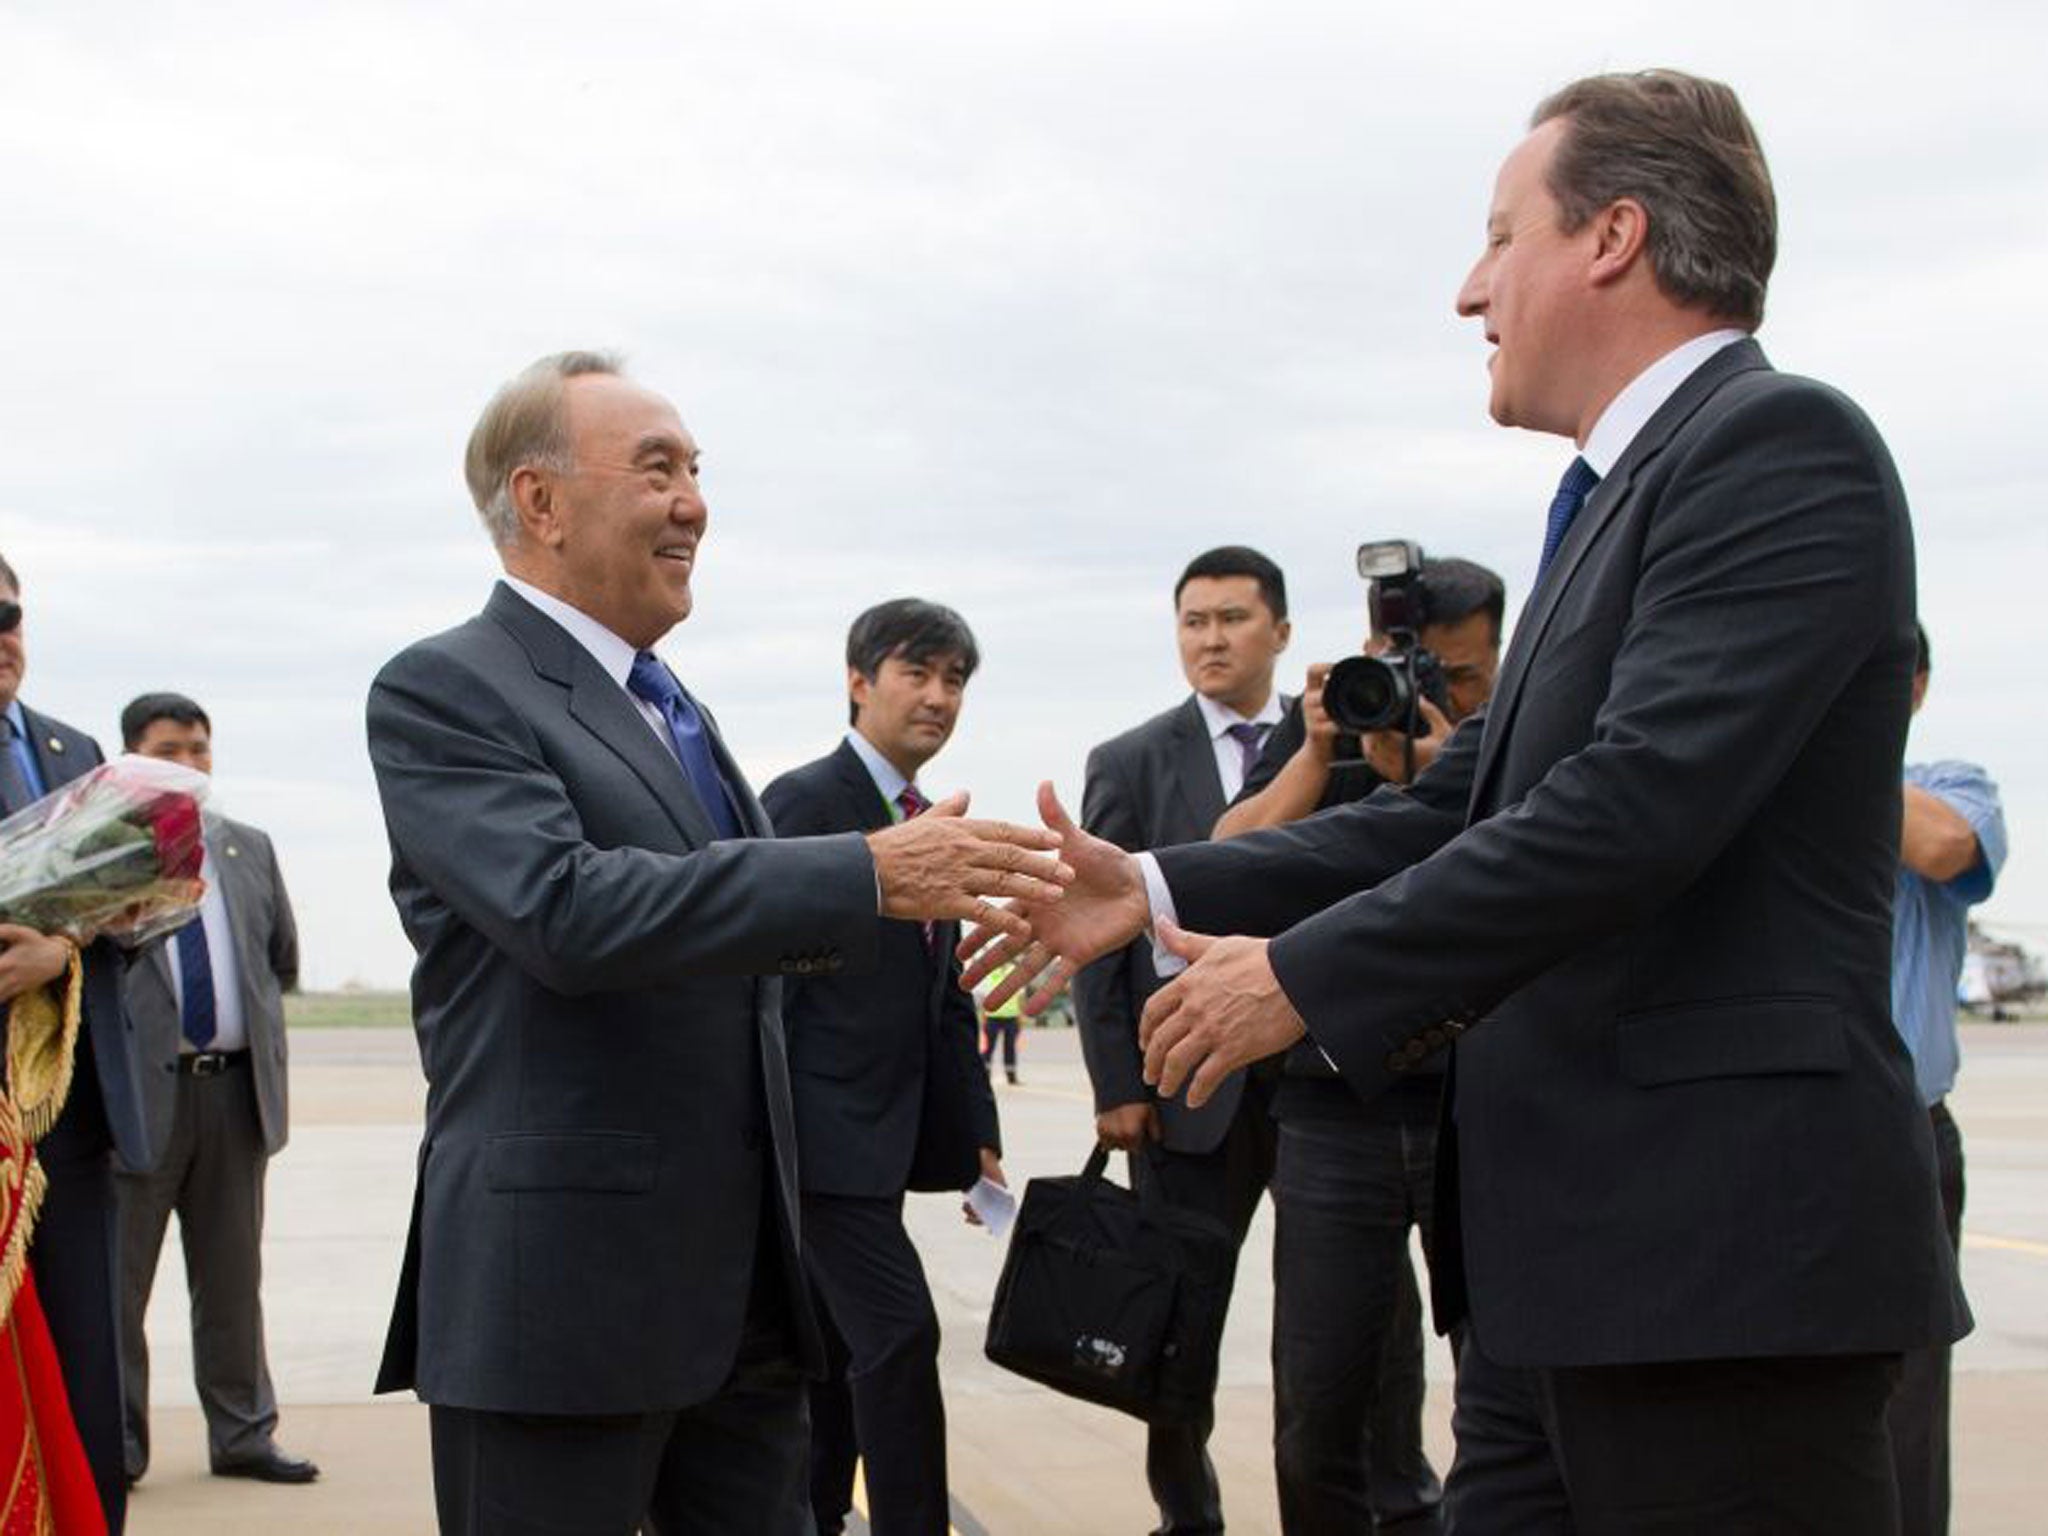 David Cameron is greeted by President Nursultan Nazarbayev after landing at Atyrau airport